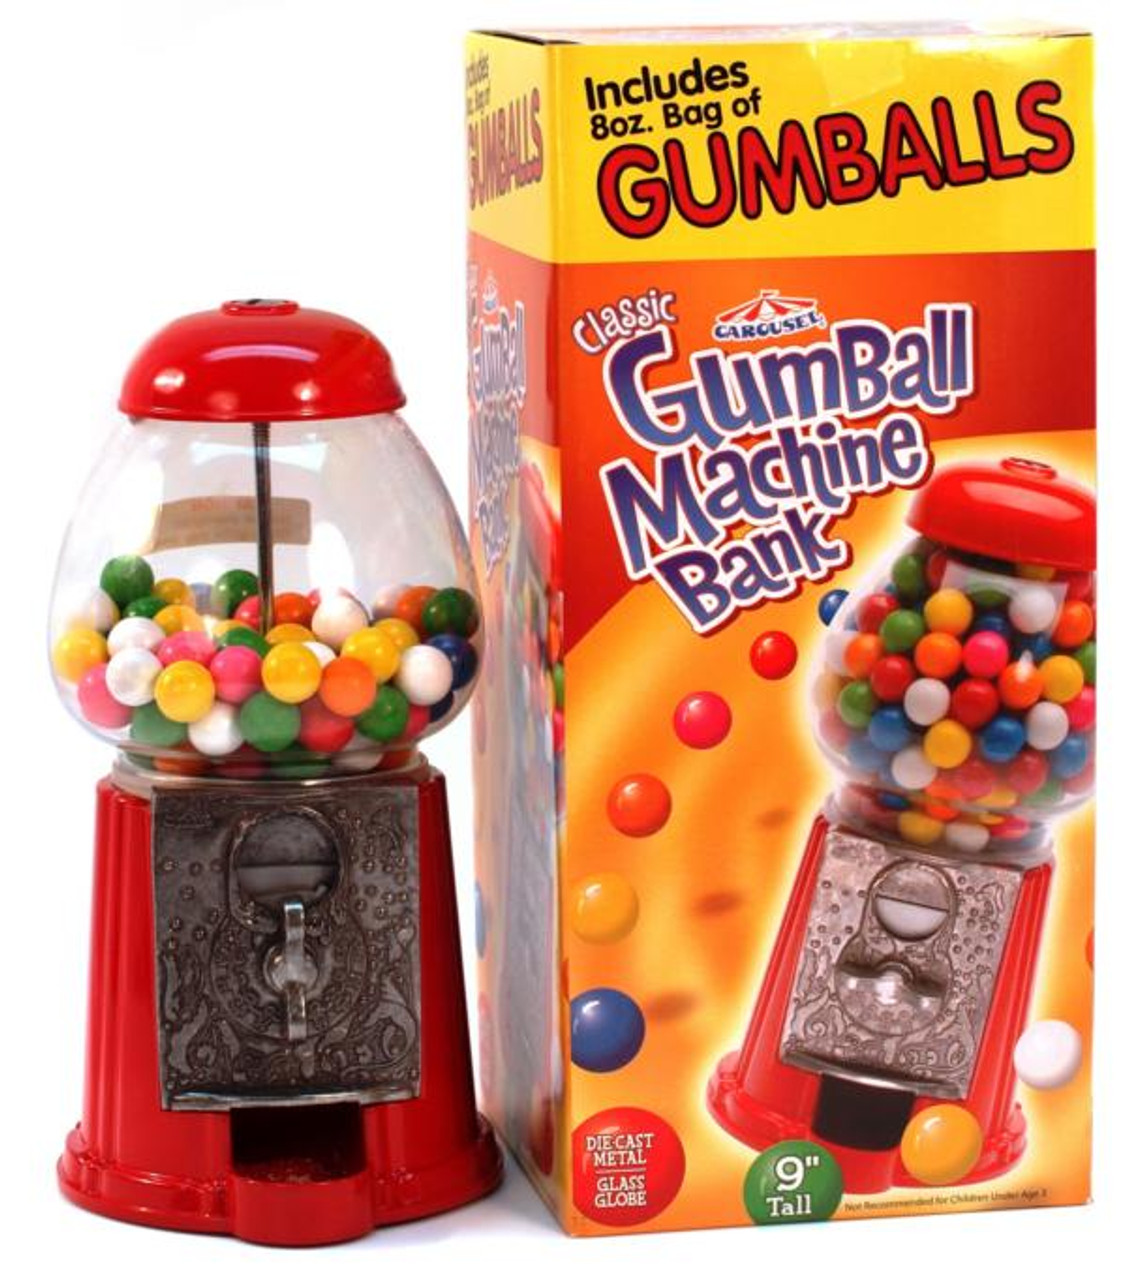 Classic Gumball Machine with Dubble Bubble Gumballs